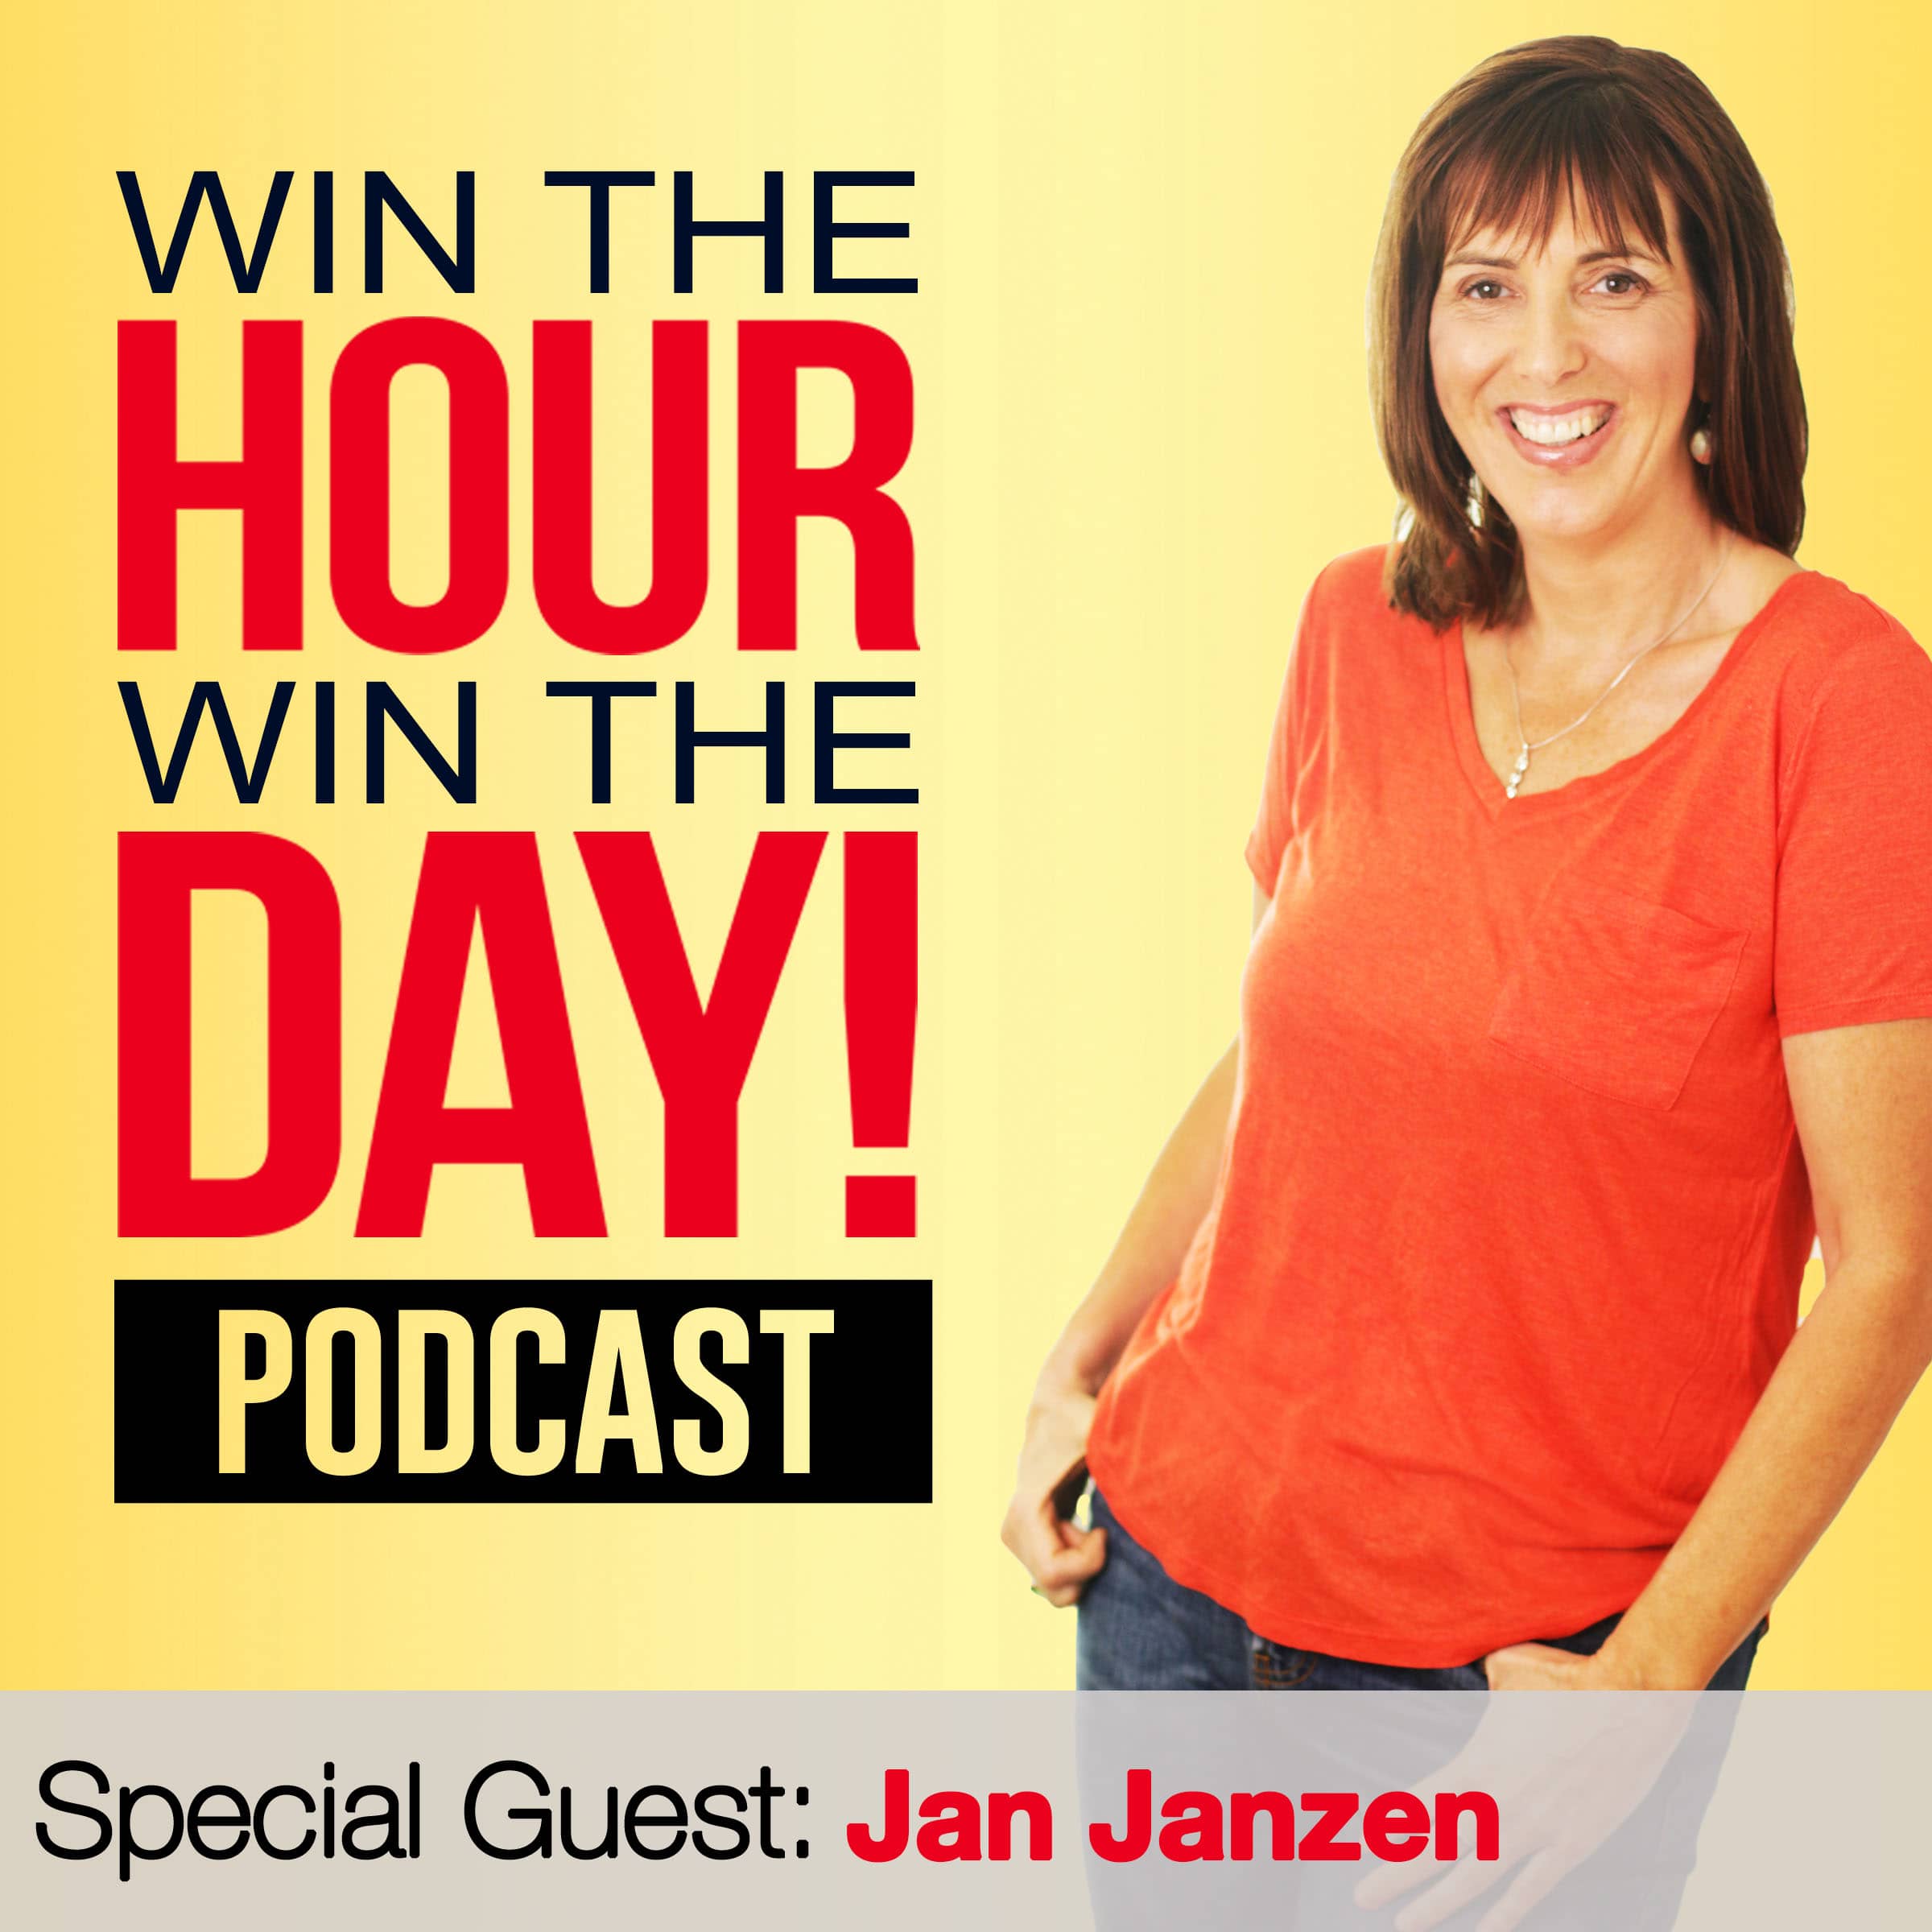 How To Easily Sell Your Client’s What They Want! With Jan Janzen